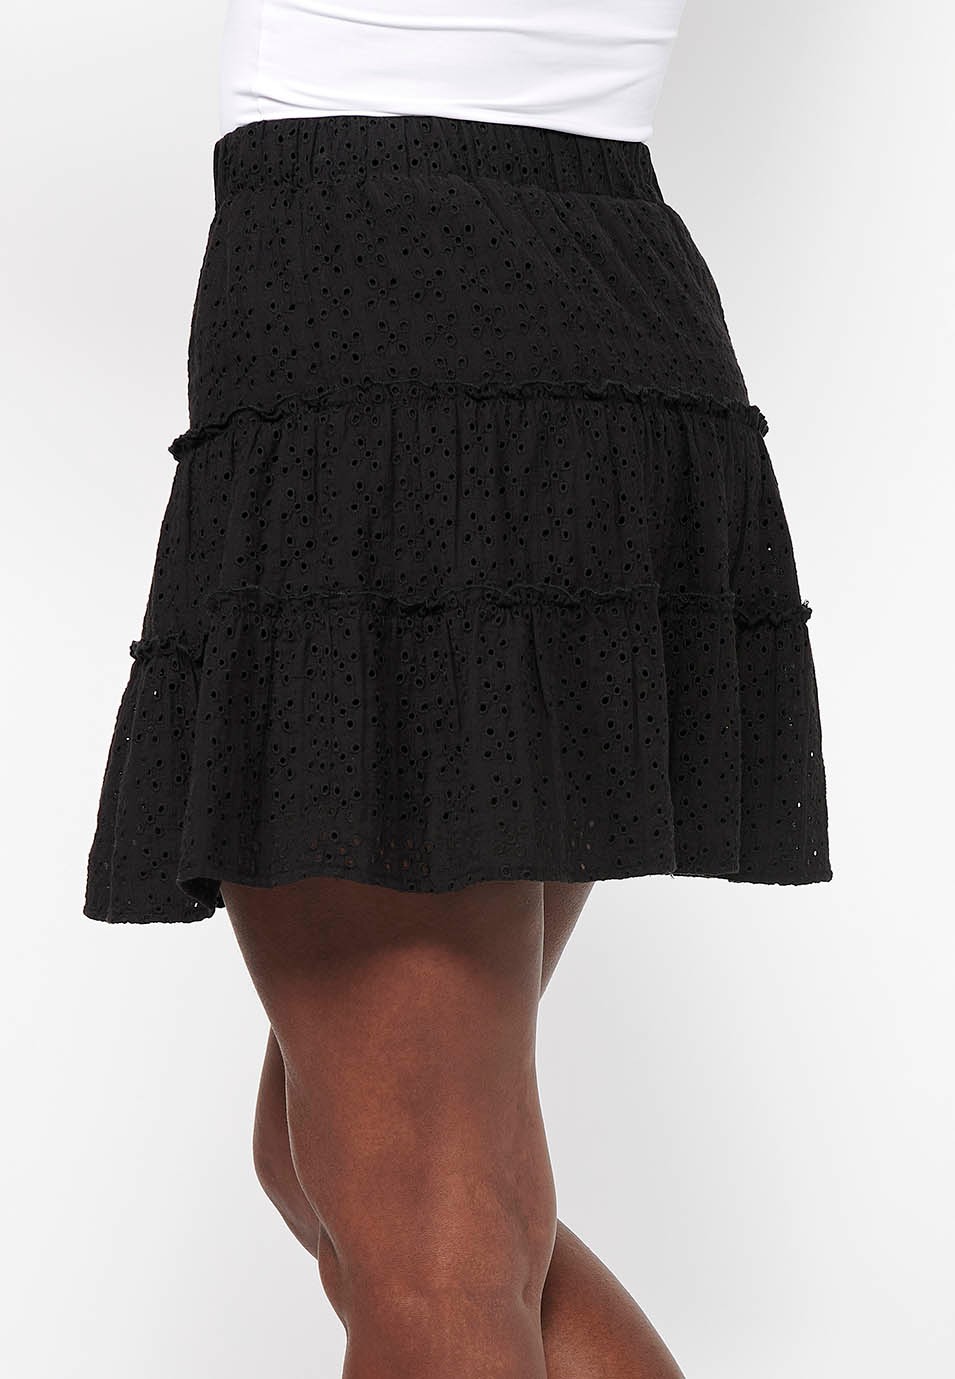 Short Cotton Skirt with Ruffle and Adjusted Waist with Elastic Band with Black Embroidered Fabric for Women 3